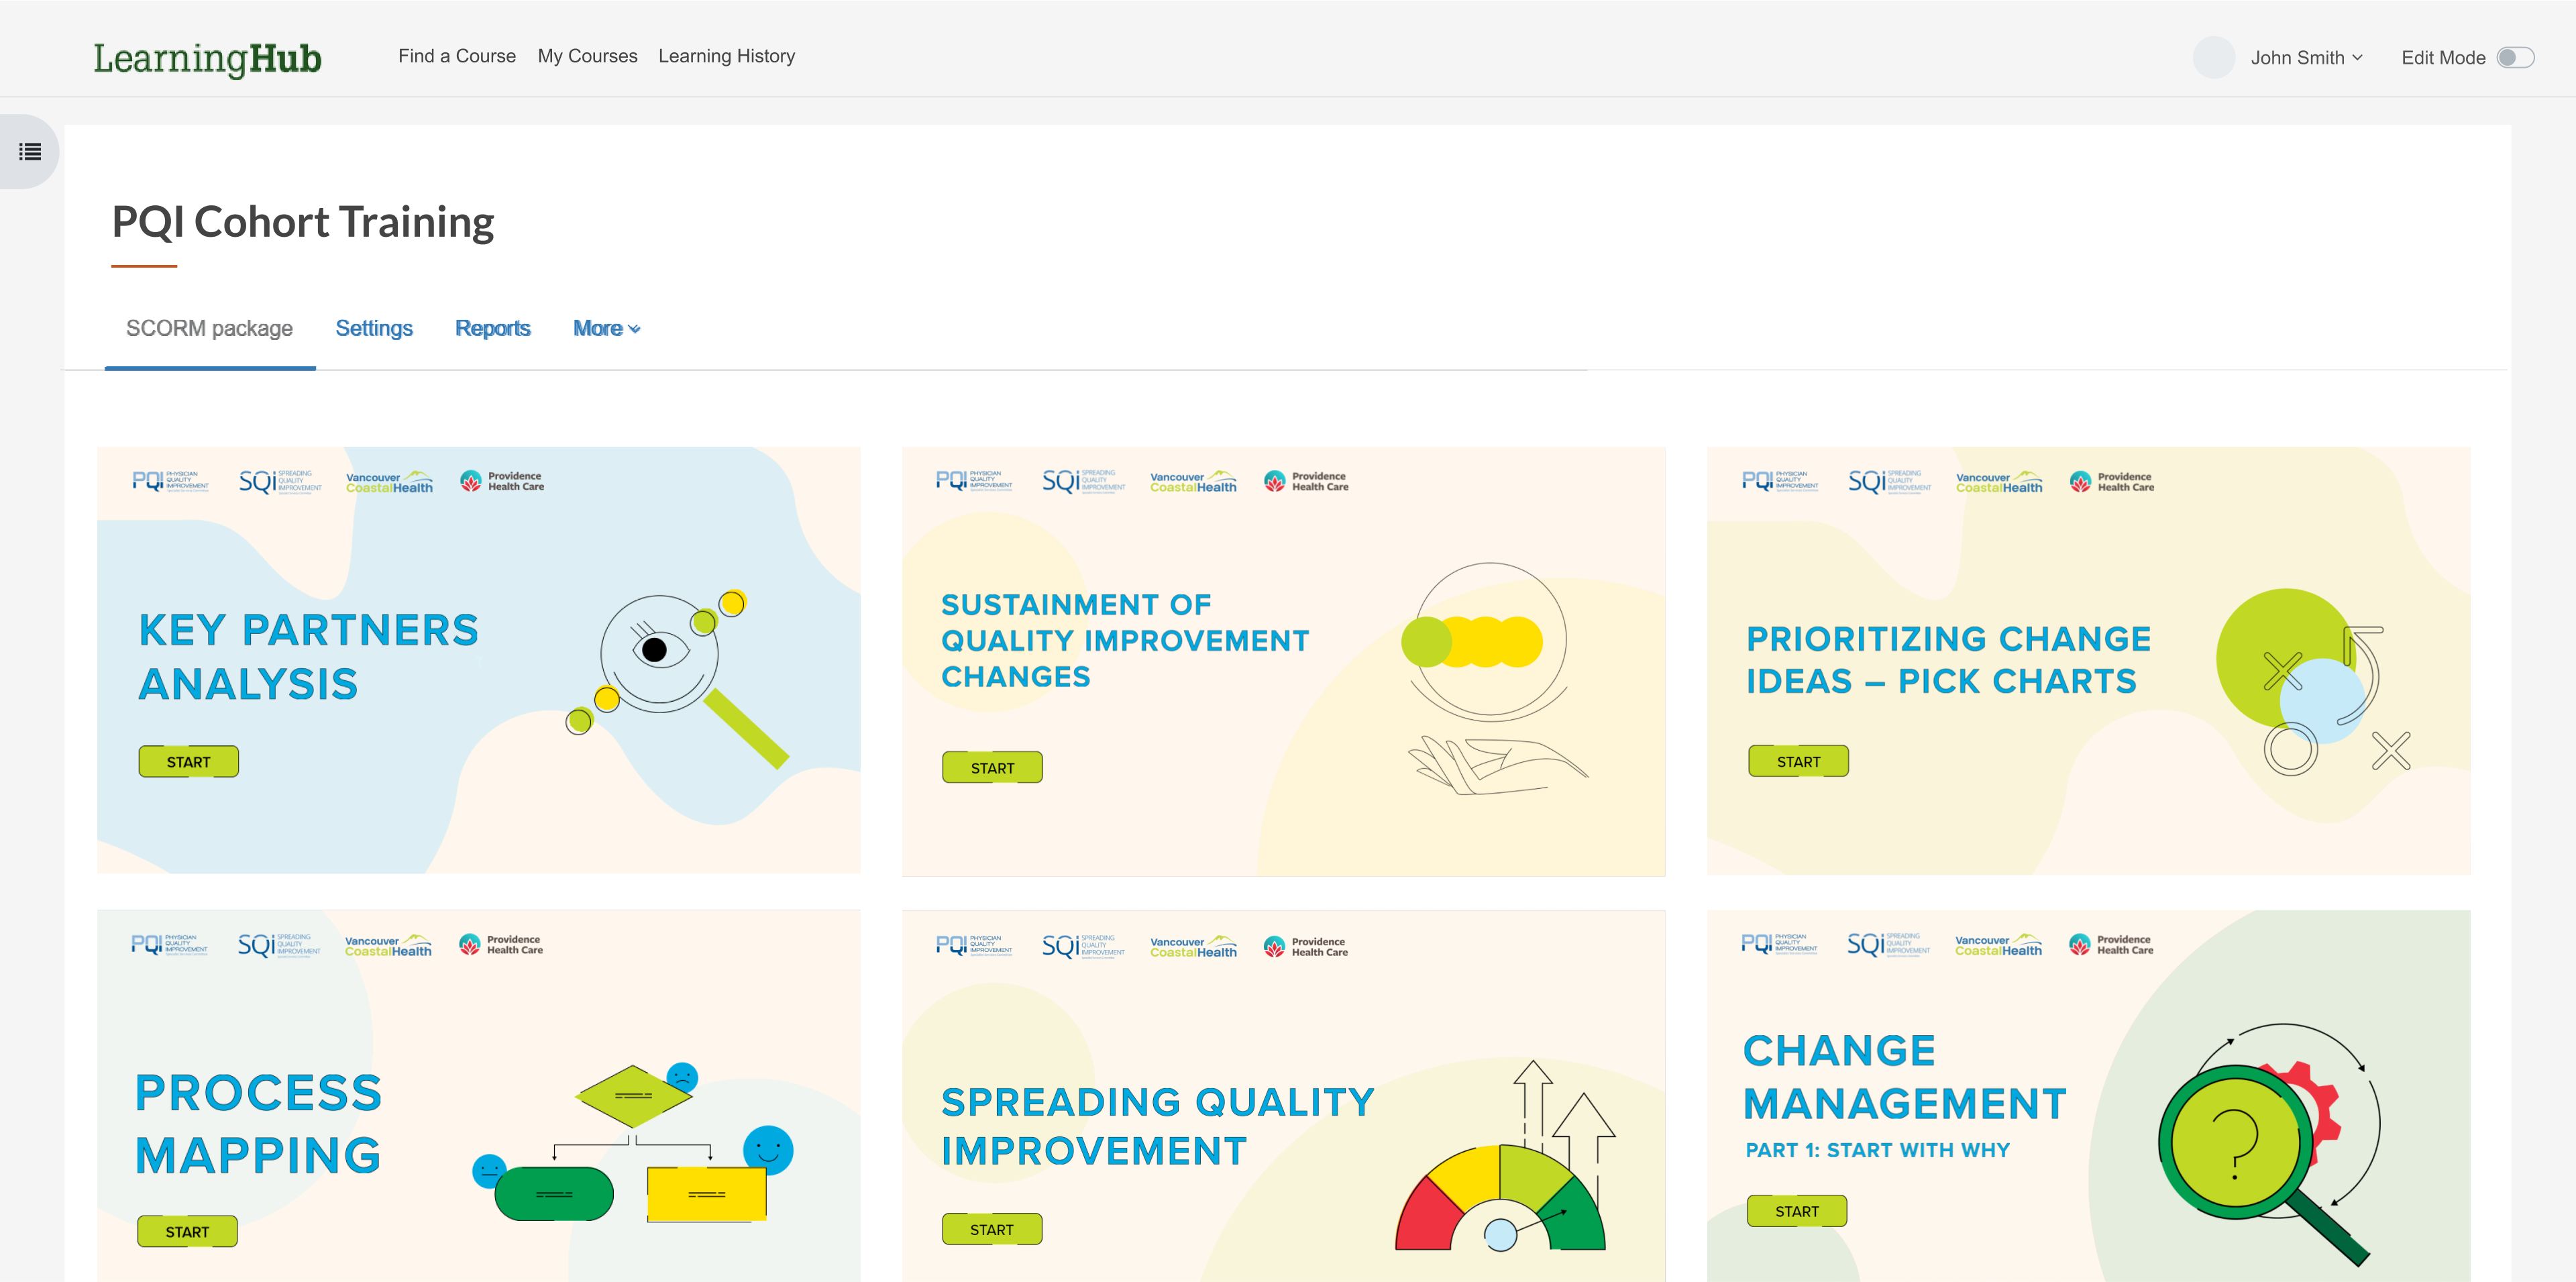 Colourful online modules on LearningHub